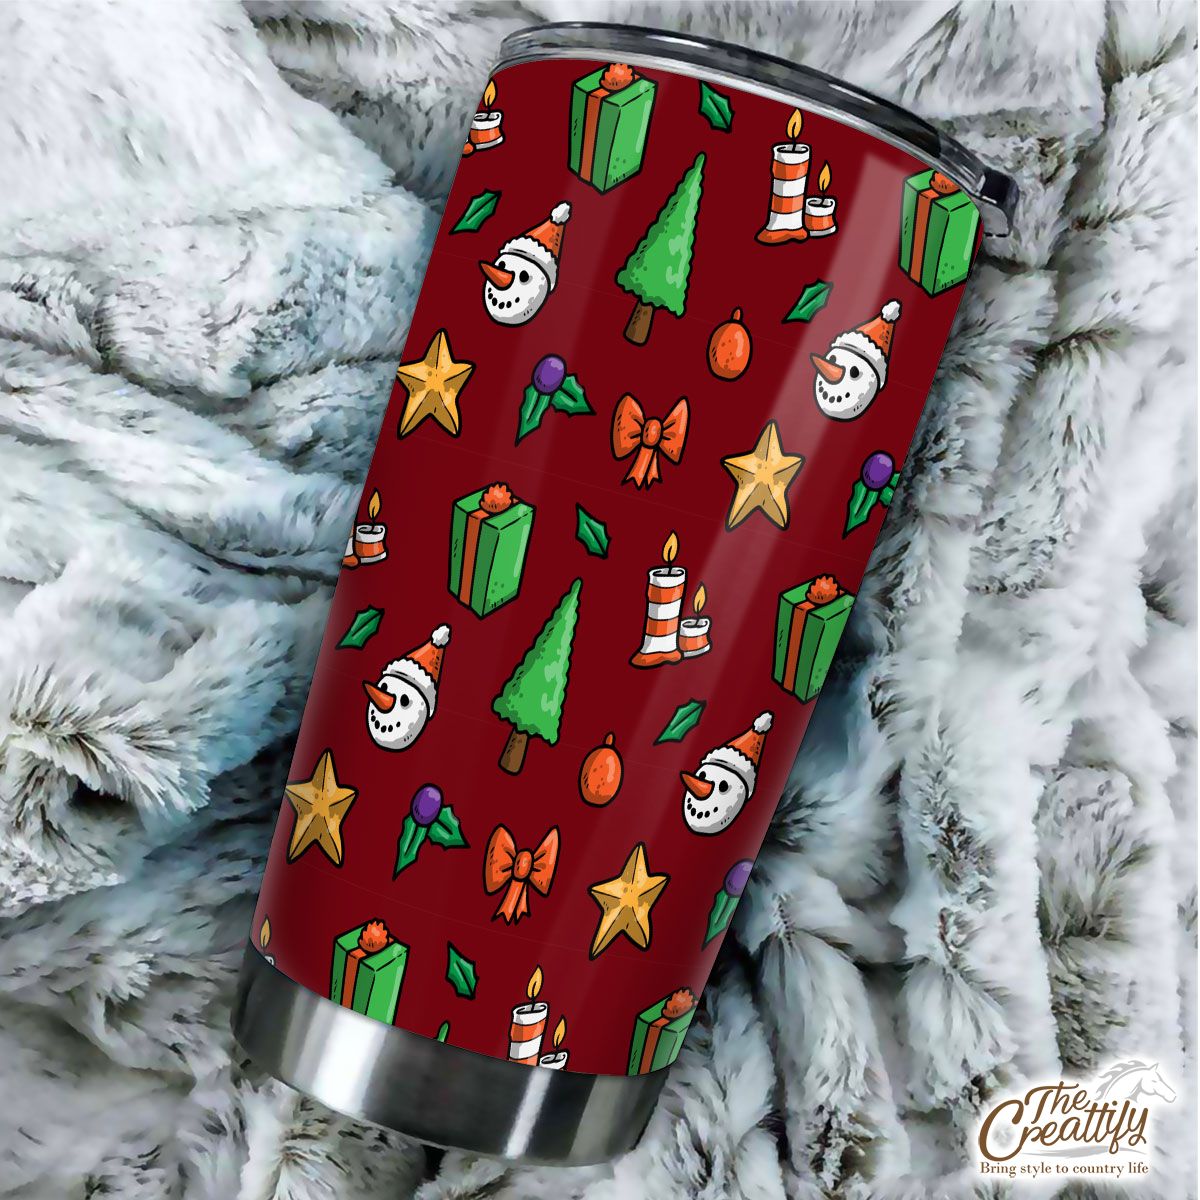 Christmas Gifts, Candles, Pine Tree And Snowman FaceWith Santa Hat Red Pattern Tumbler